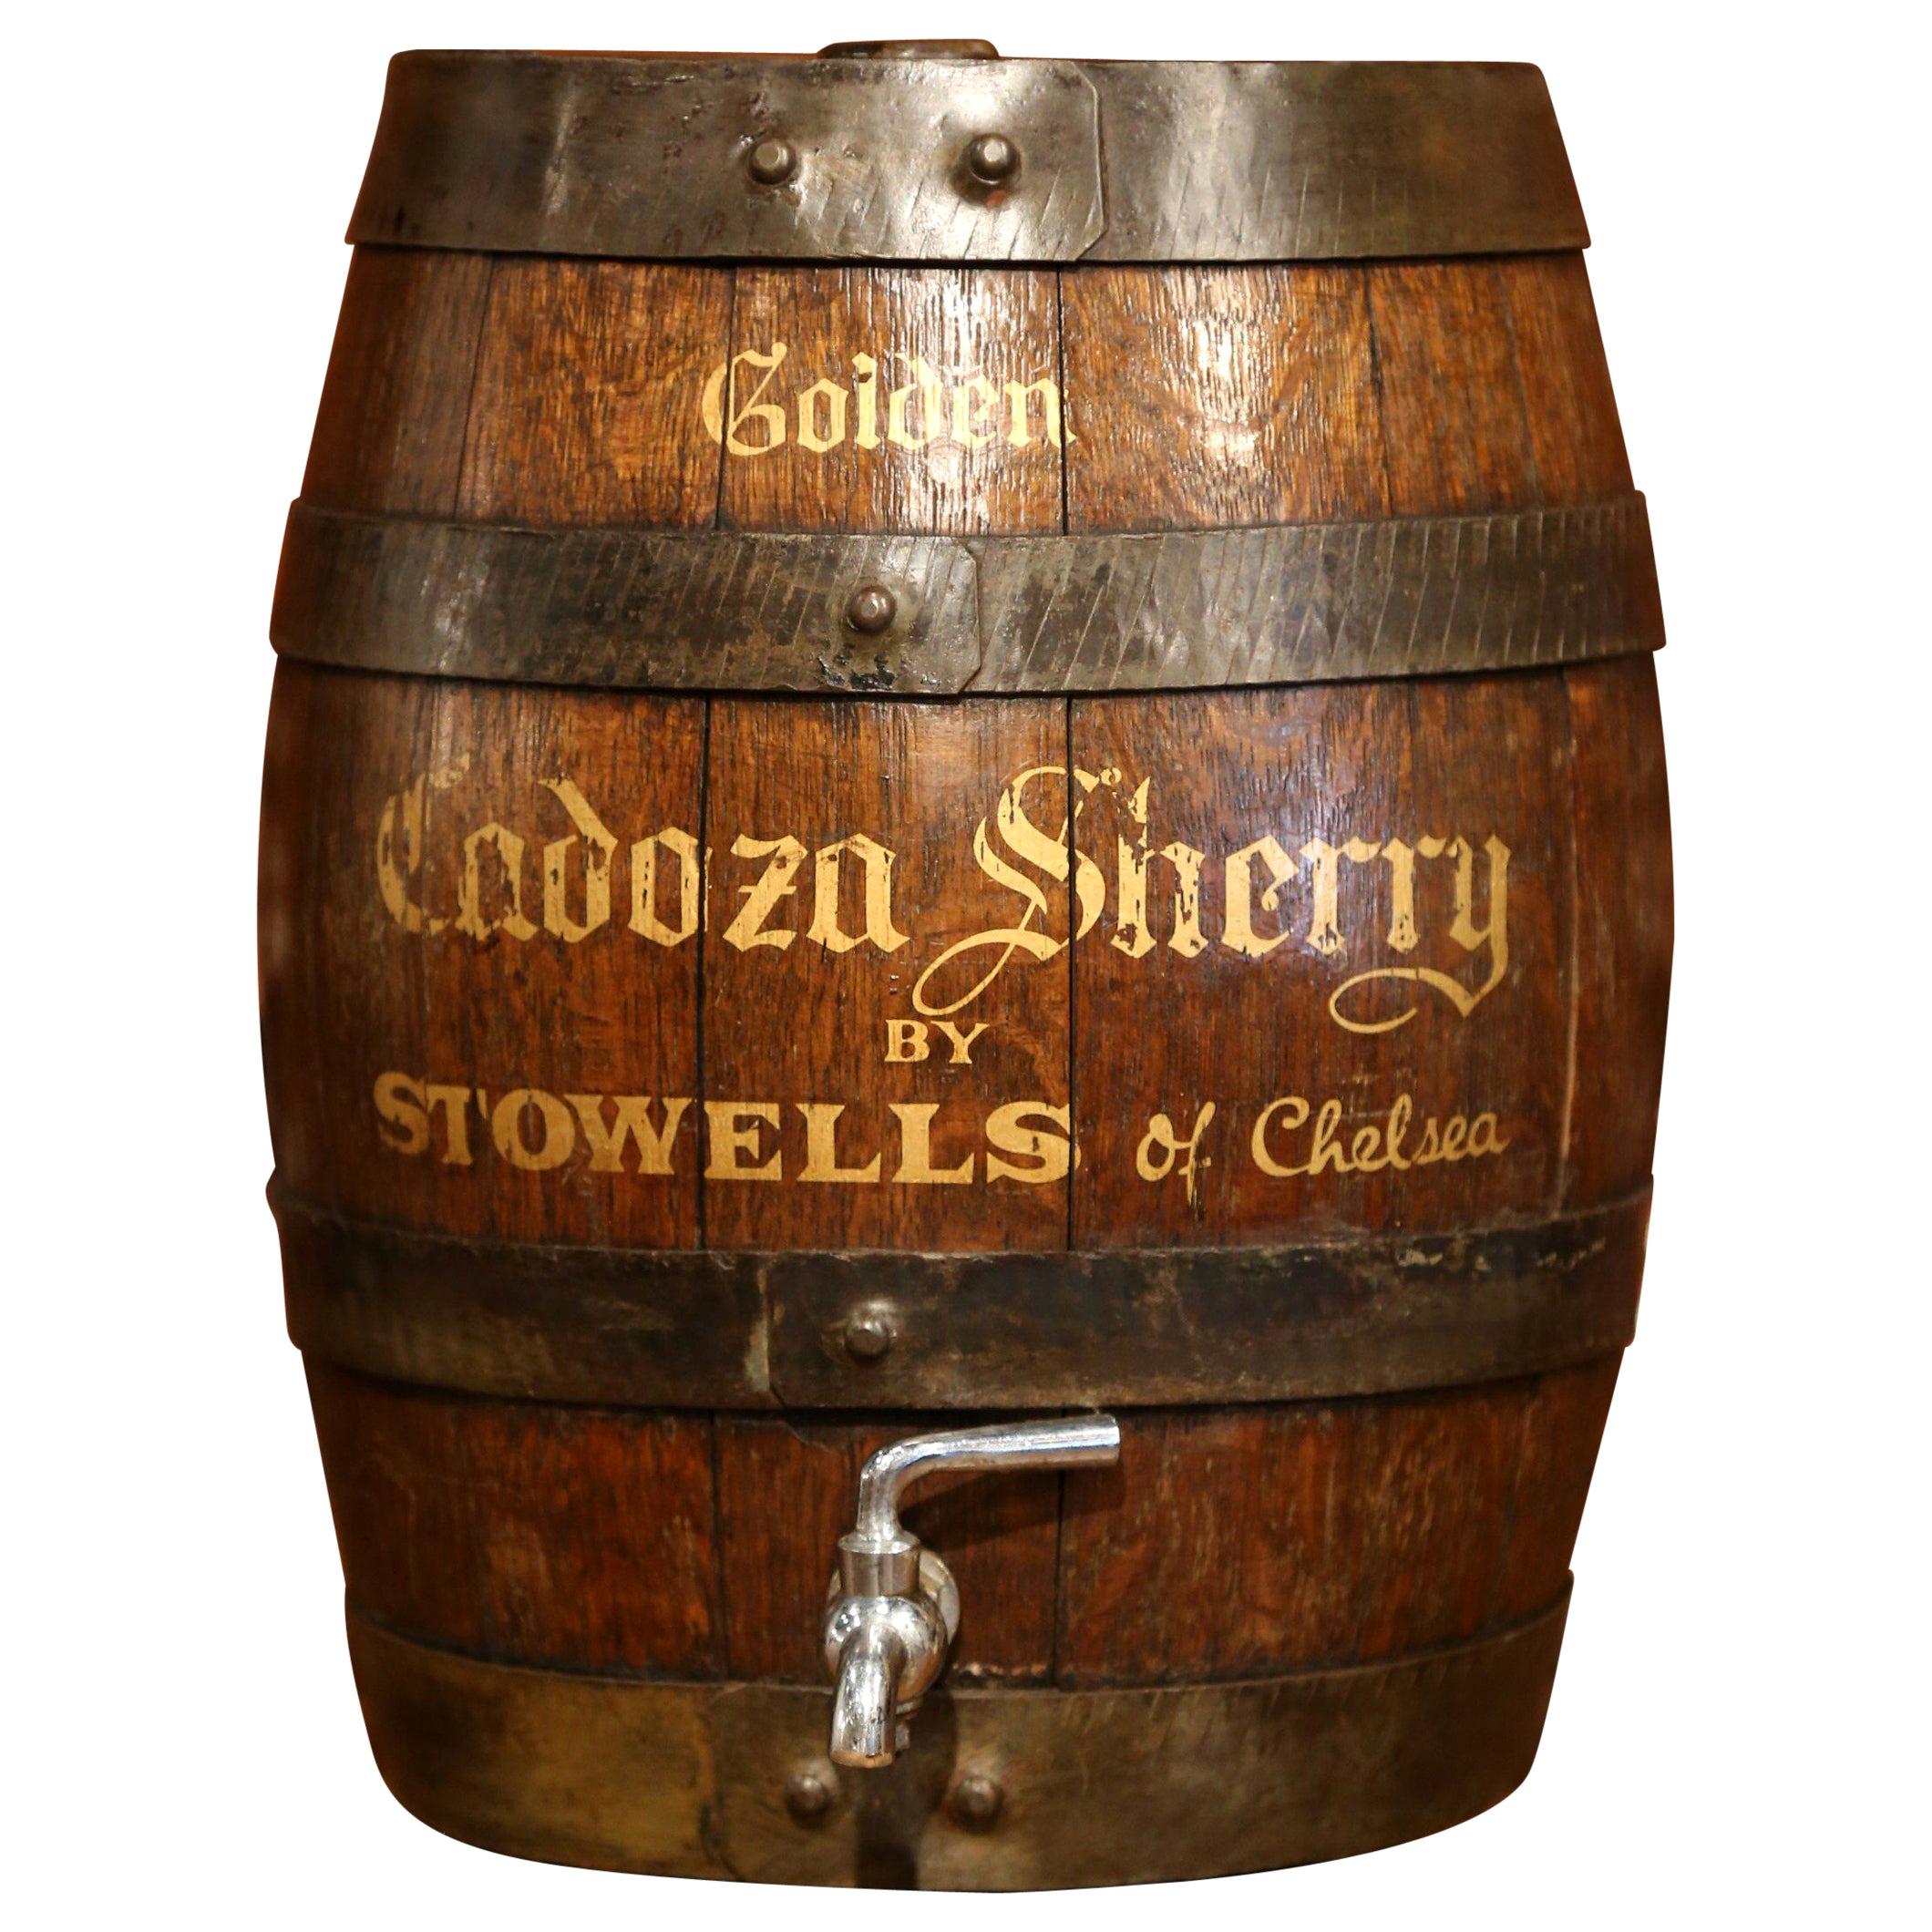 Early 20th Century English Carved Oak and Metal Cream Sherry Barrel